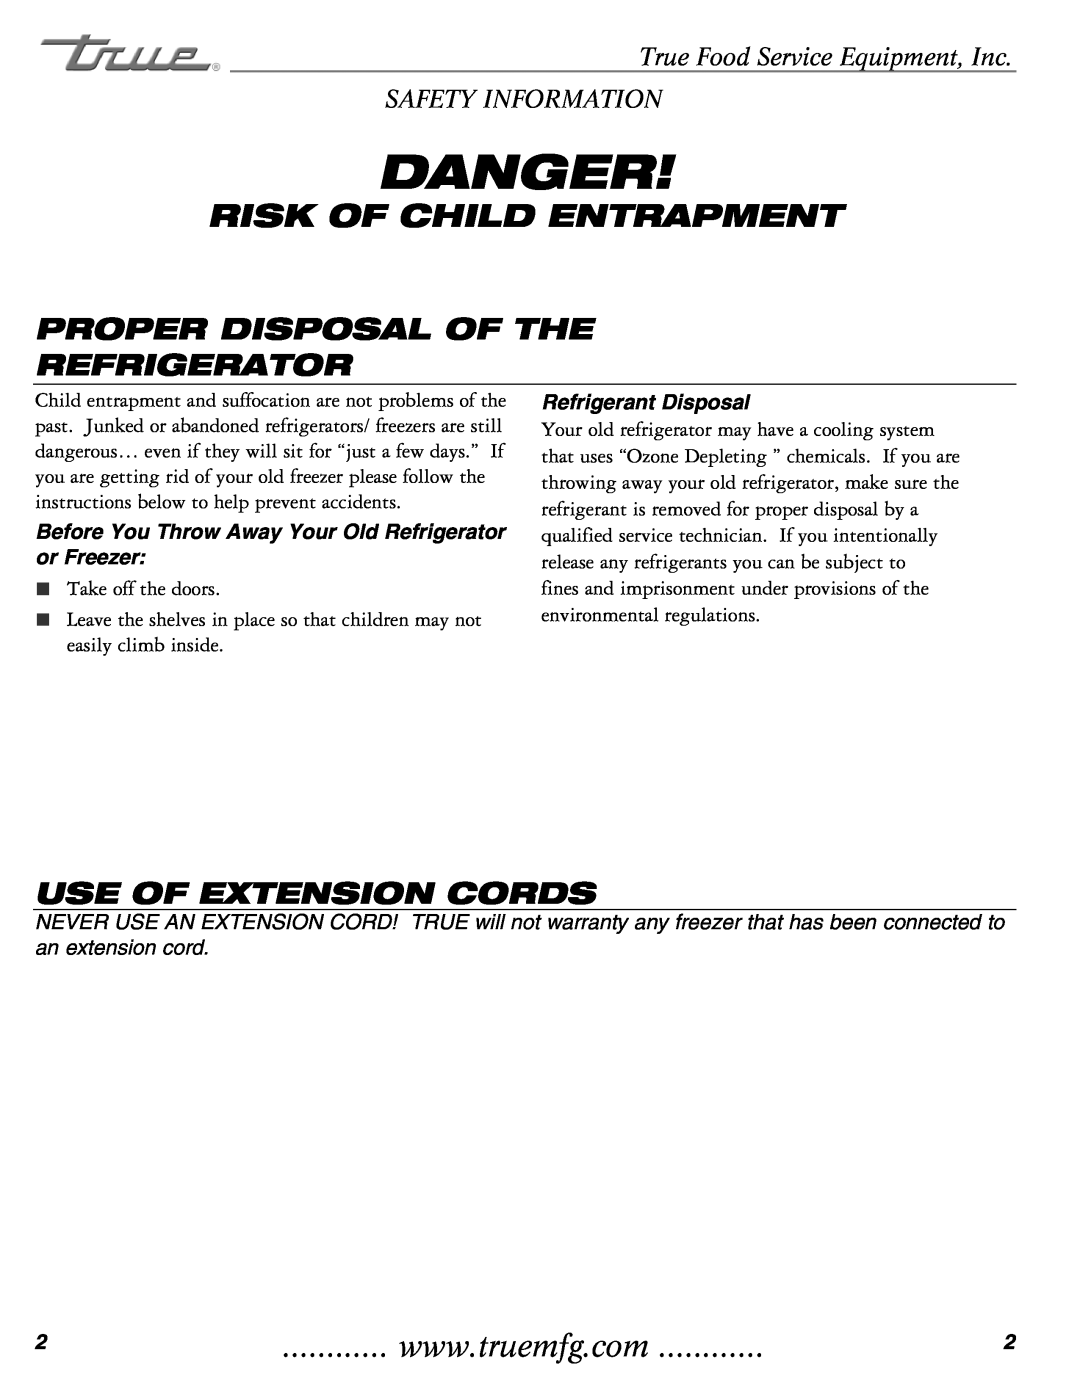 True Manufacturing Company THF-41FL Risk Of Child Entrapment, Proper Disposal Of The Refrigerator, Use Of Extension Cords 